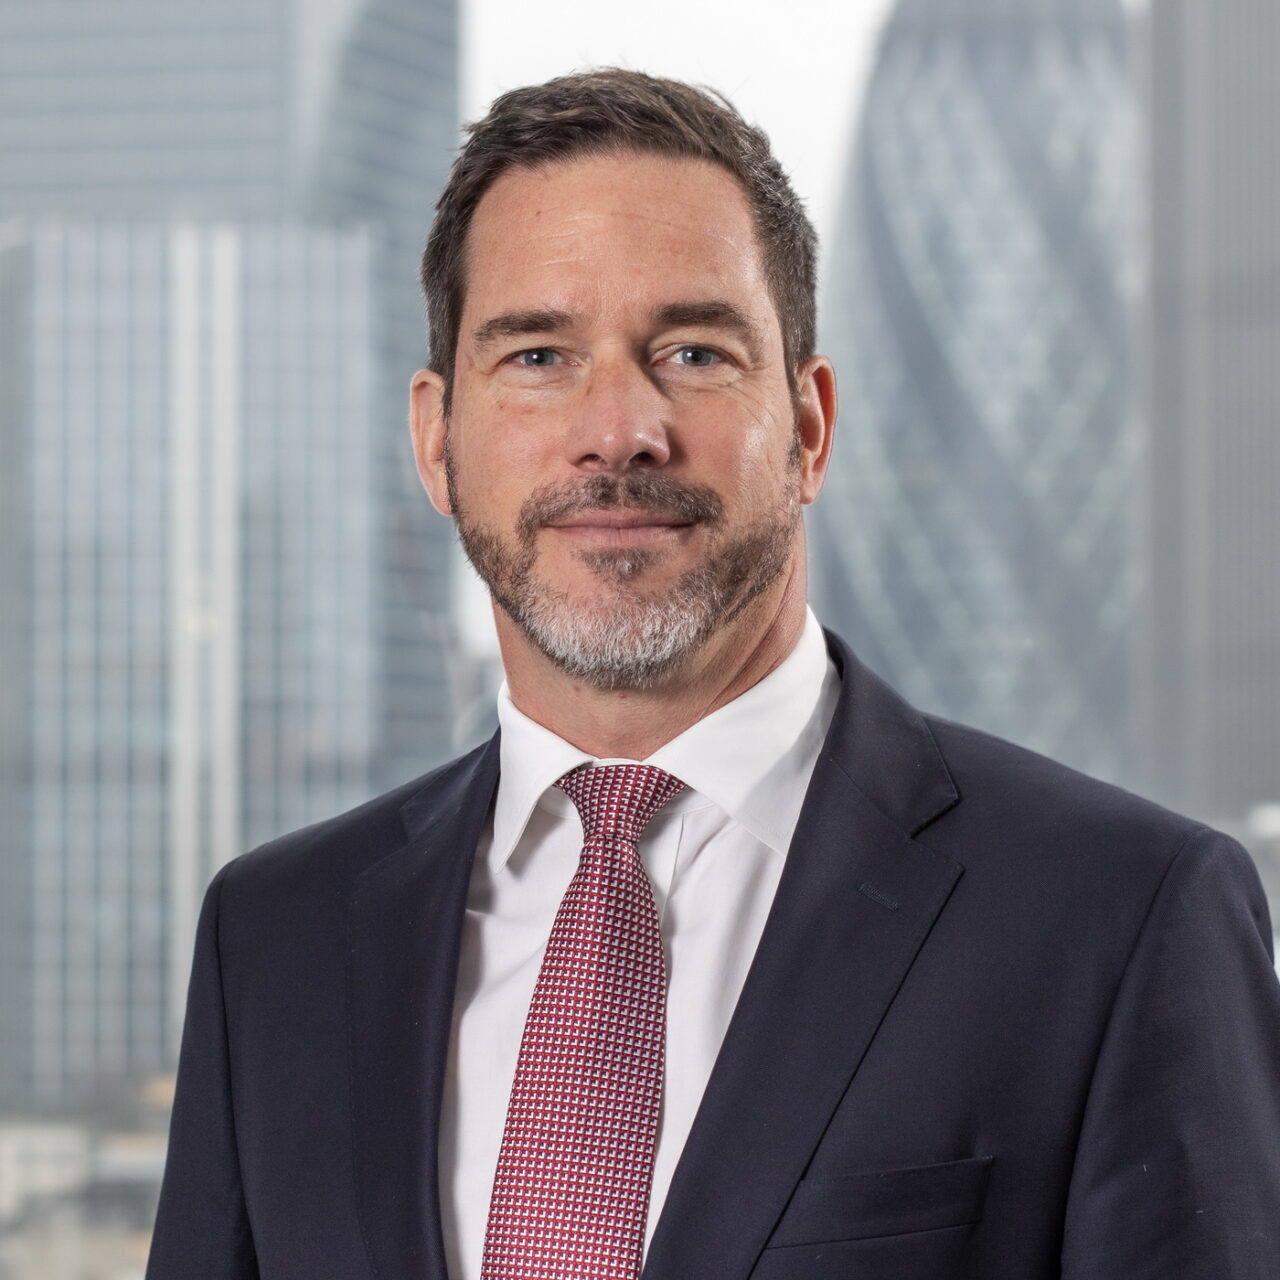 Schroders Capital ernennt Global Head of Business Development and Product